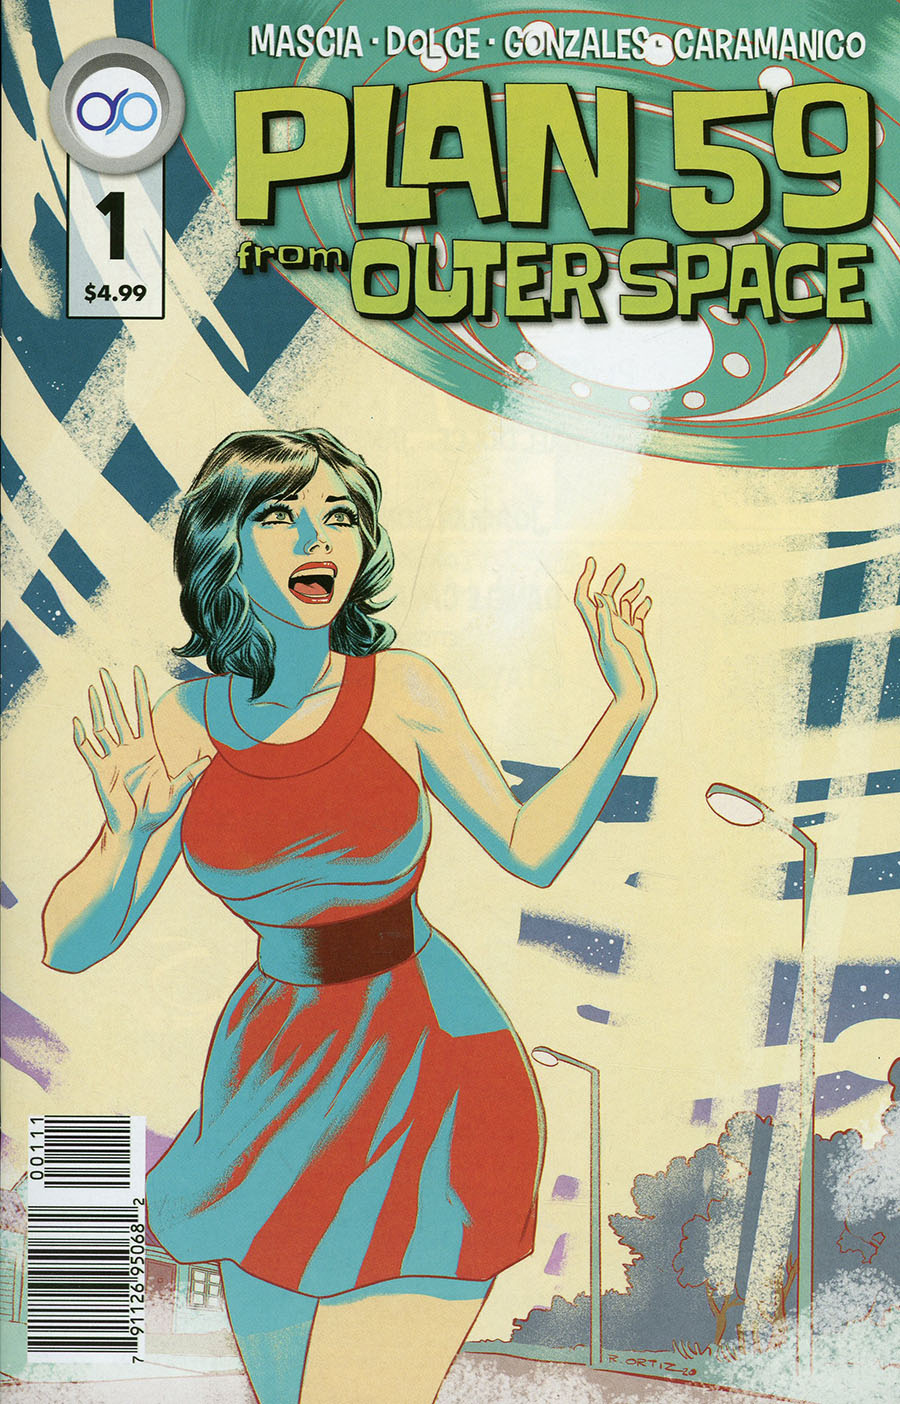 Plan 59 From Outer Space #1